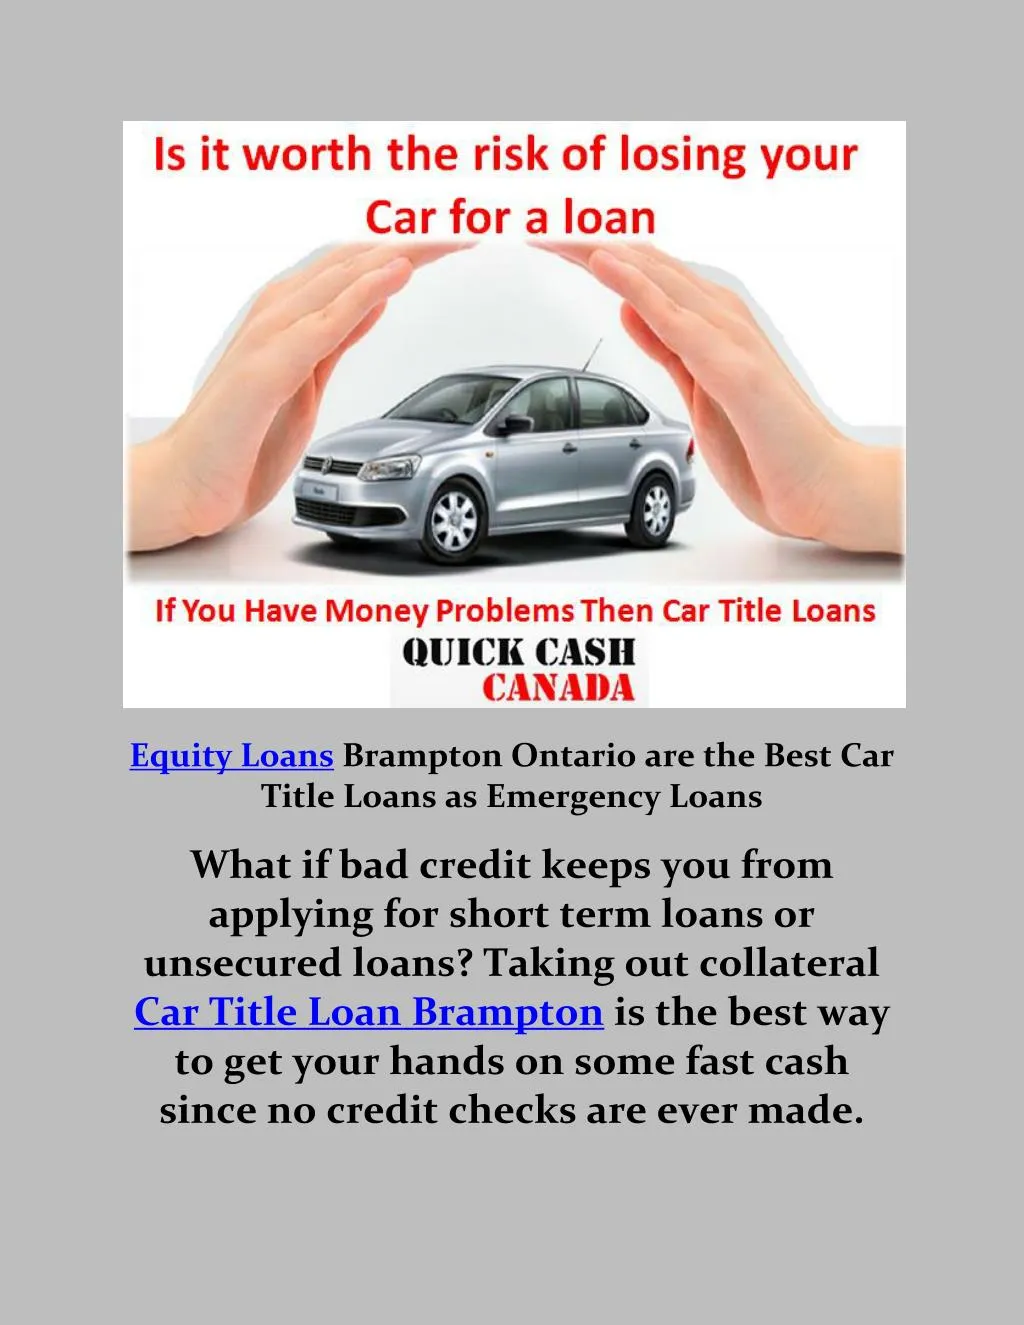 equity loans brampton ontario are the best